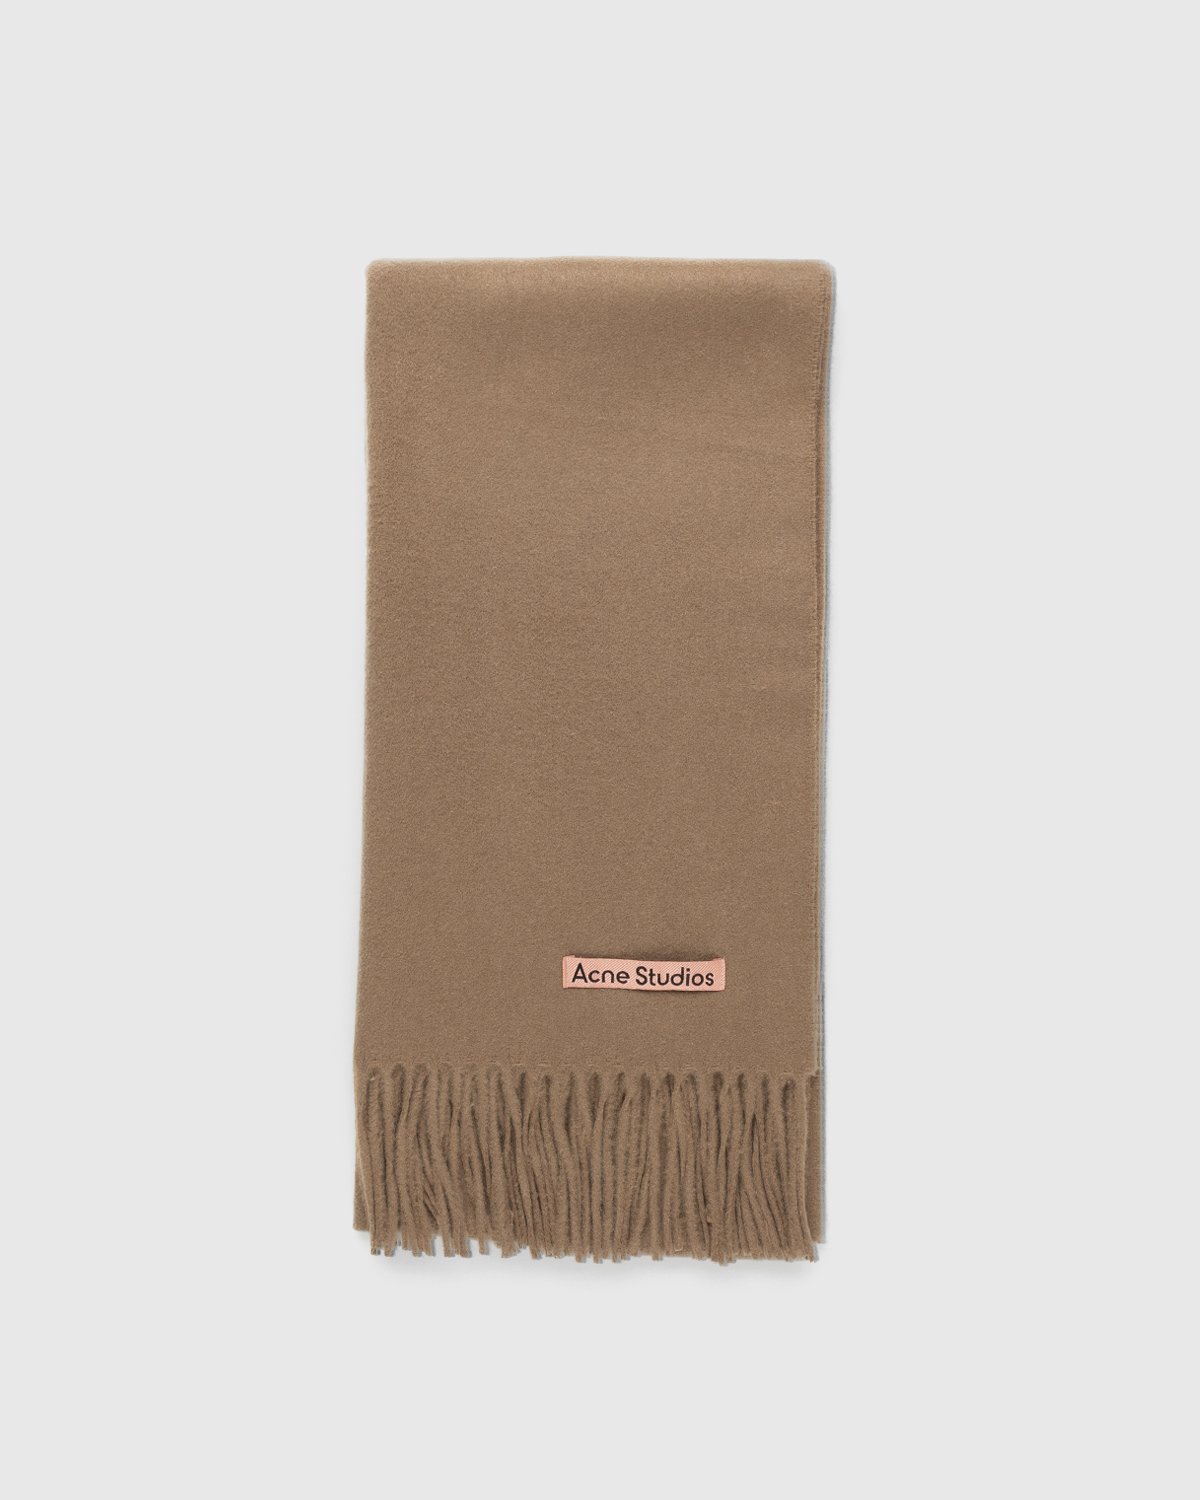 Acne Studios - Narrow Cashmere Scarf Caramel Brown - Accessories - Brown - Image 2